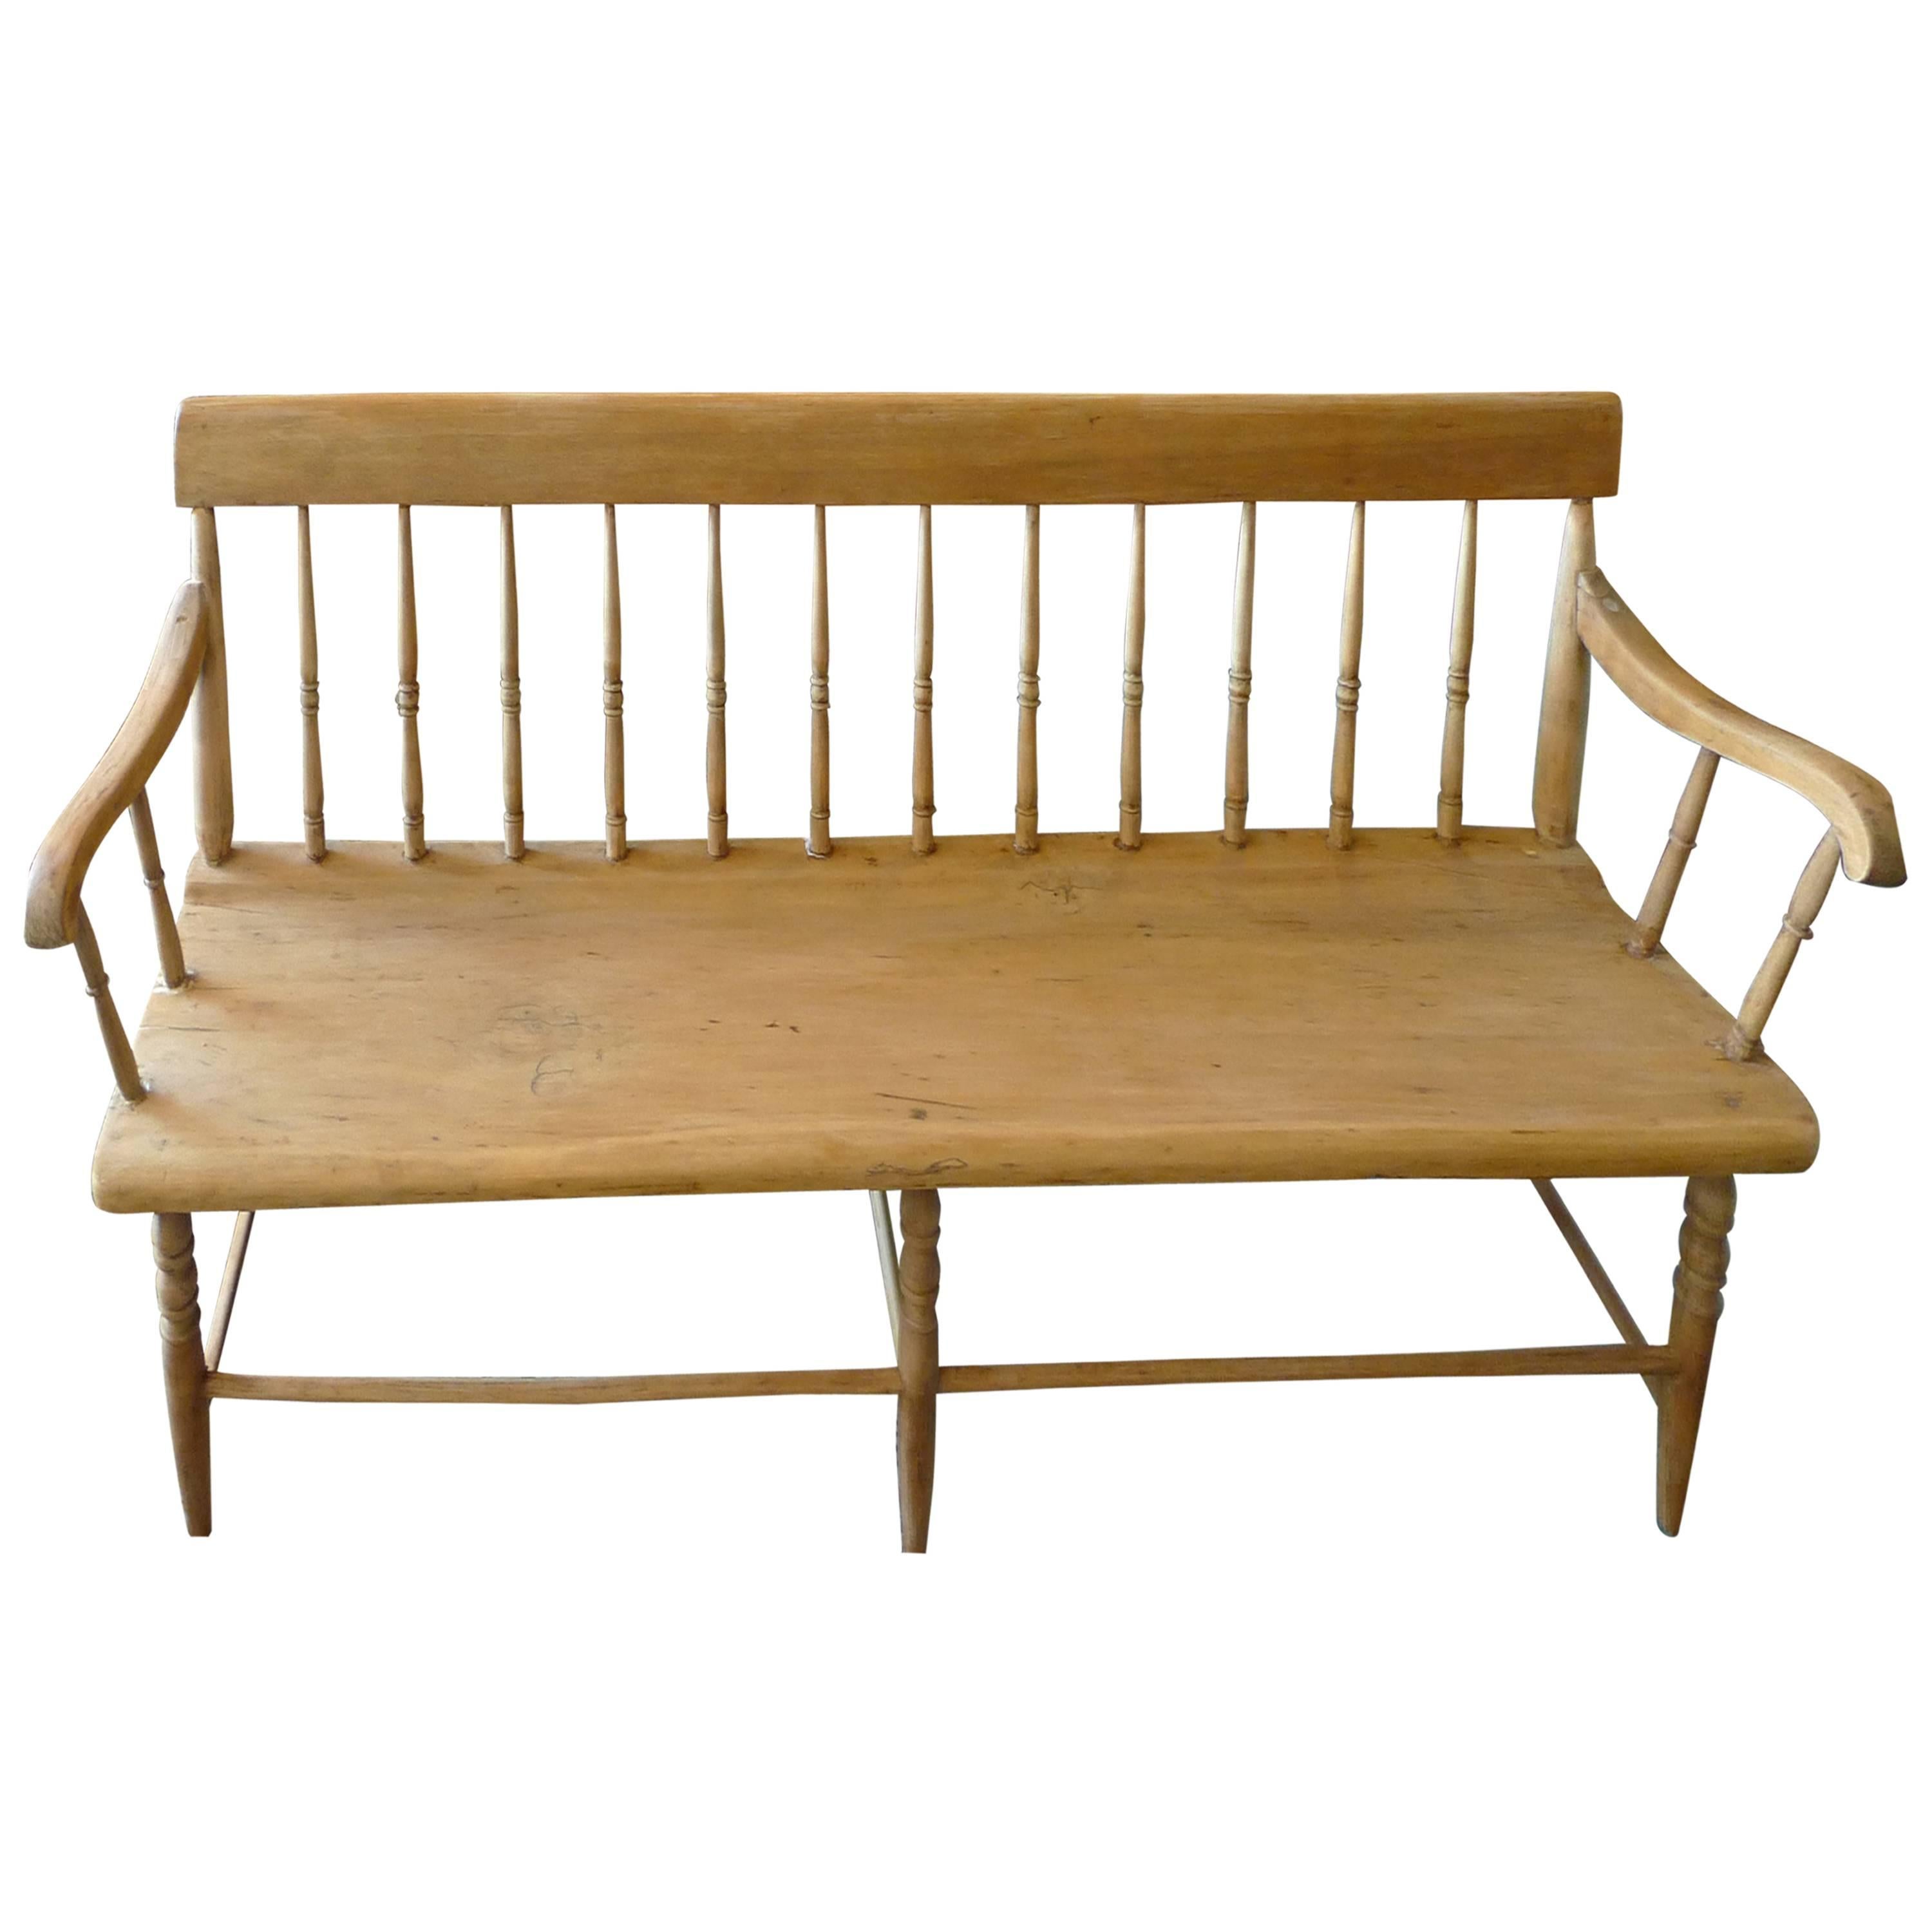 English 19th Century Small Pine Bench with Back and Side Arms and Six Legs